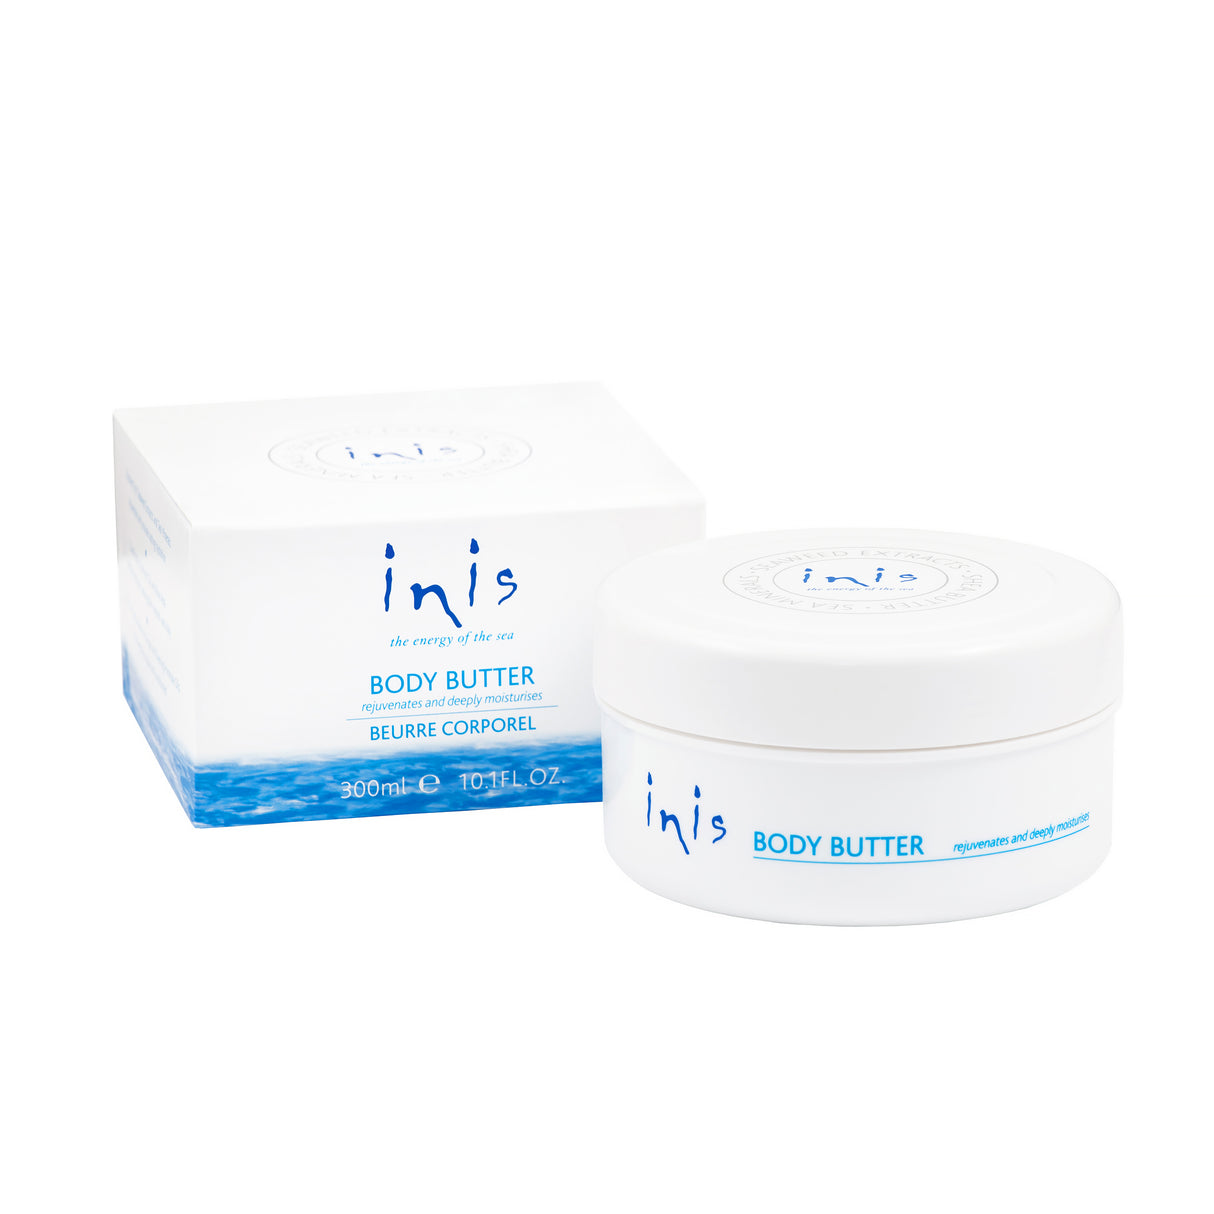 Inis Body Butter and display box